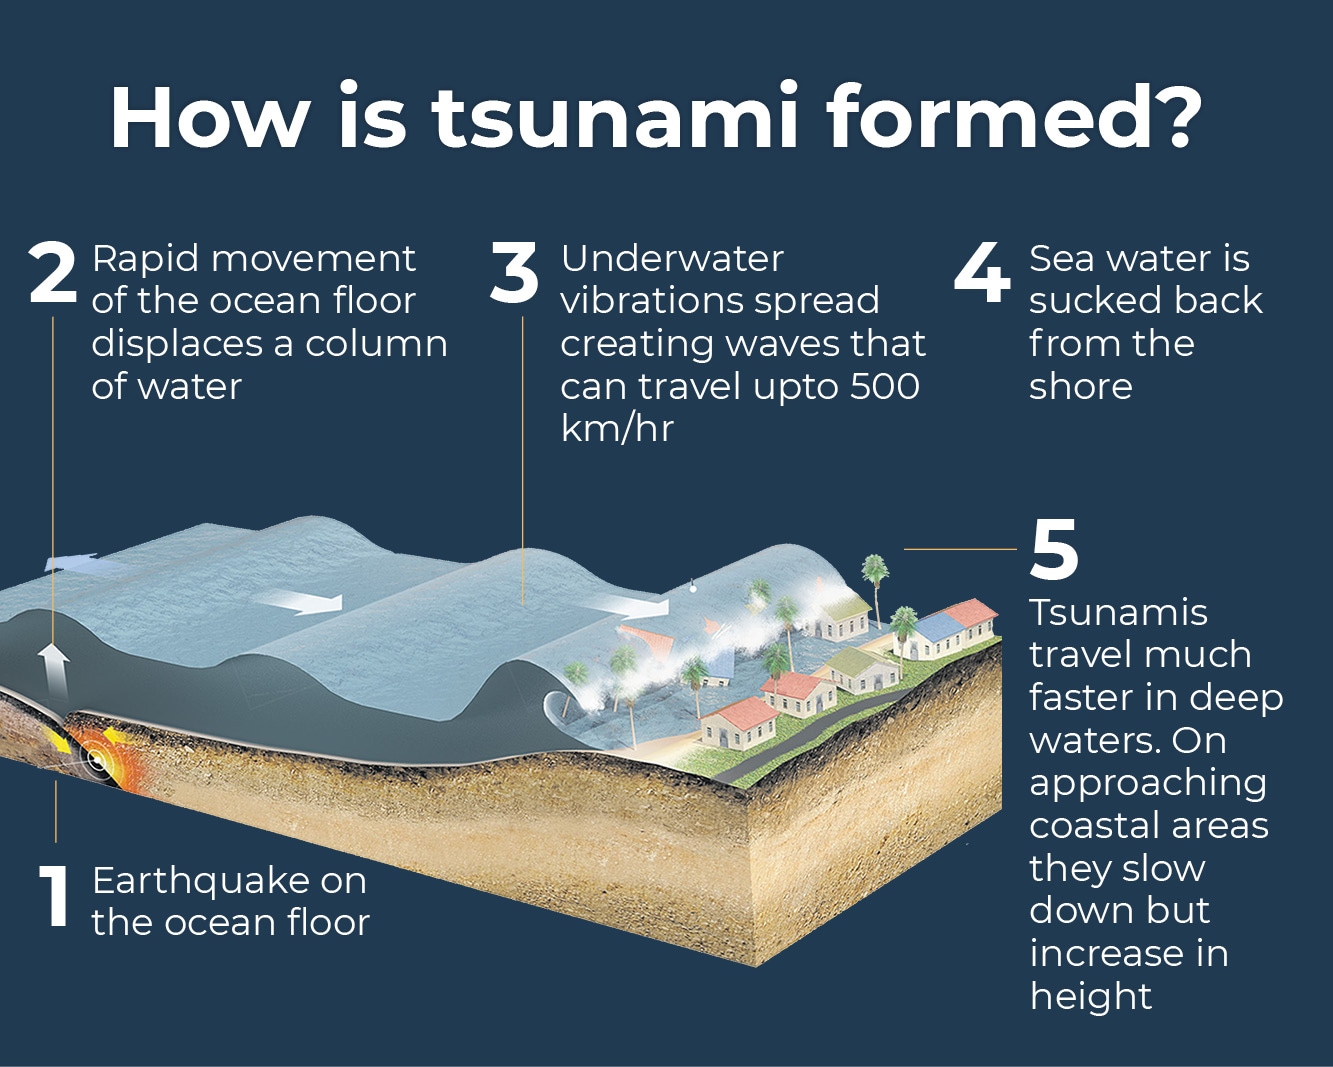 In Pictures: Anatomy of a Tsunami - cnbctv18.com.